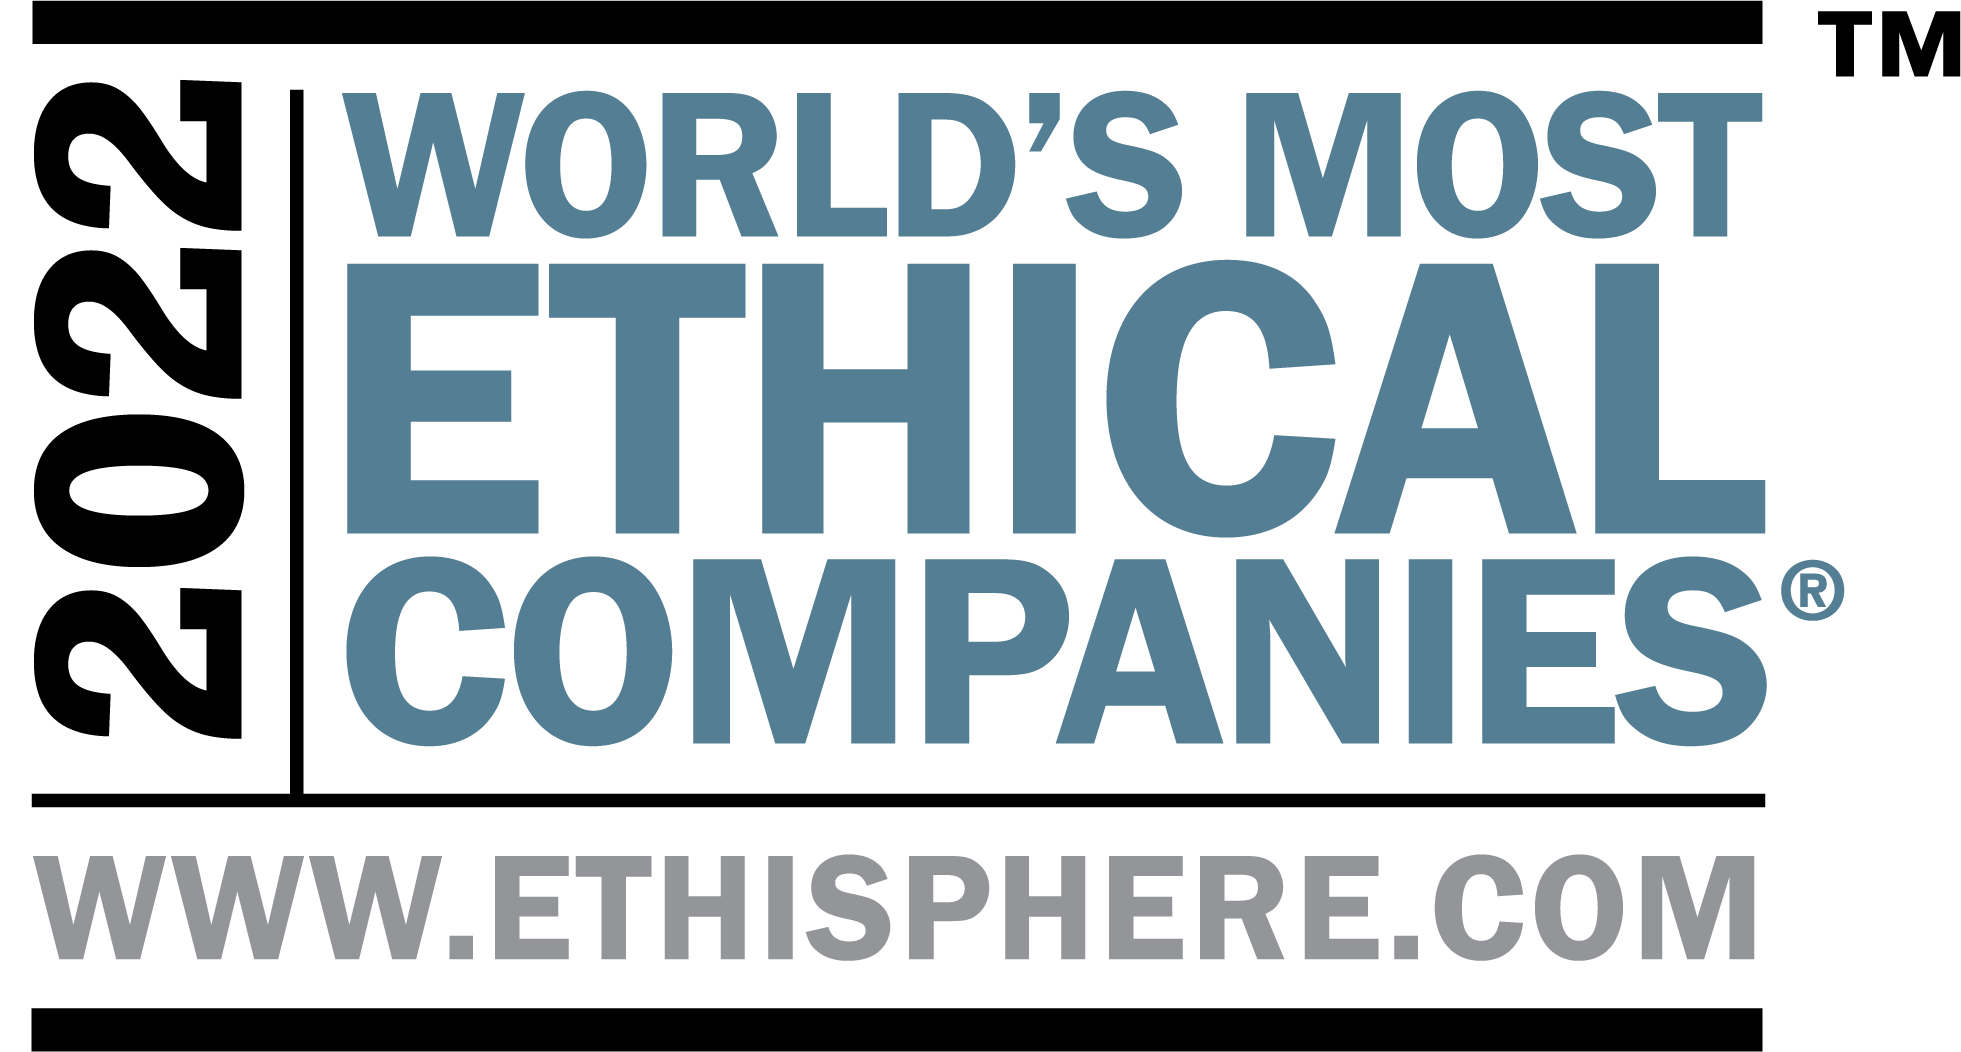 Ethisphere 2021 World's Most Ethical Companies